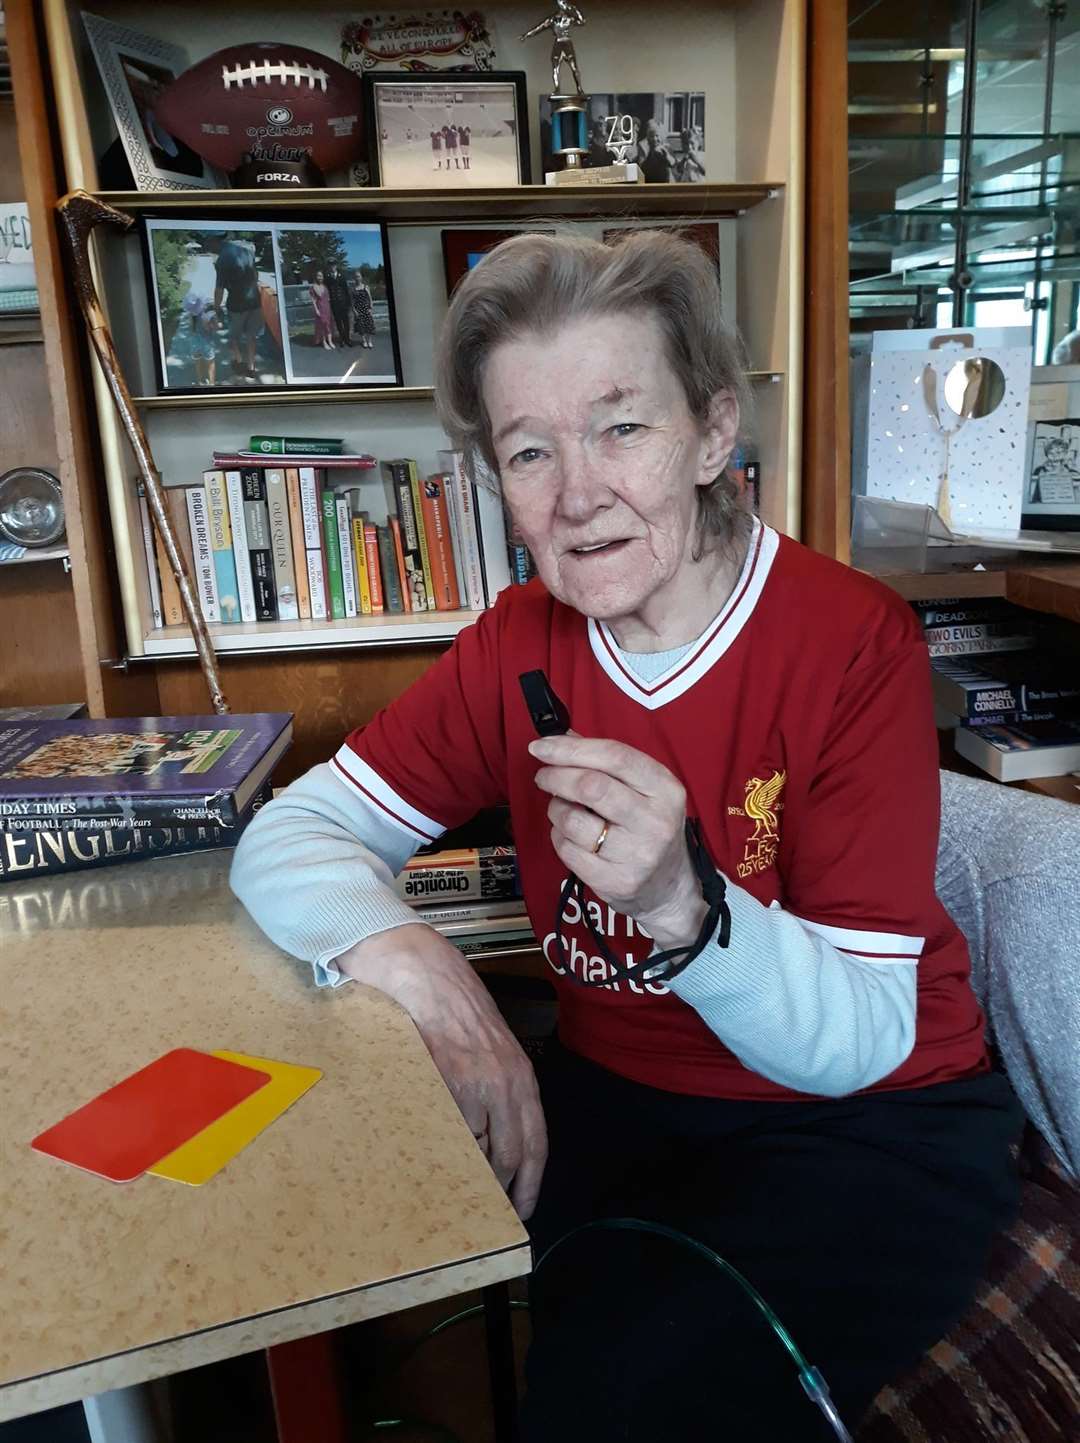 Lyn in her favourite Liverpool strip, with her favourite old whistle - and those indispensable cards!